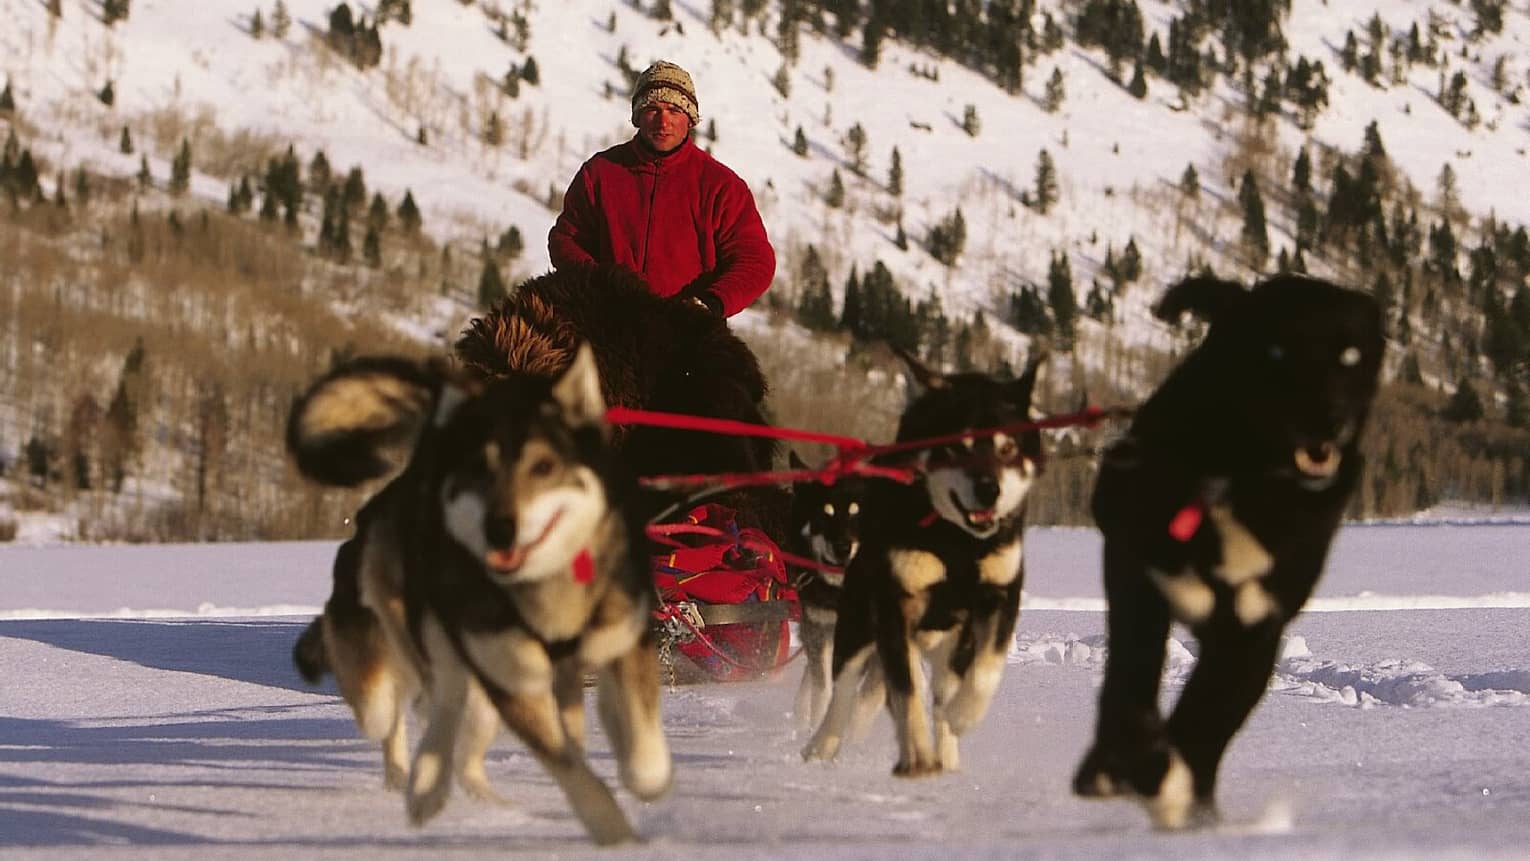 A group of dogs pulling a sled over the snow with a man in a red jacket in it